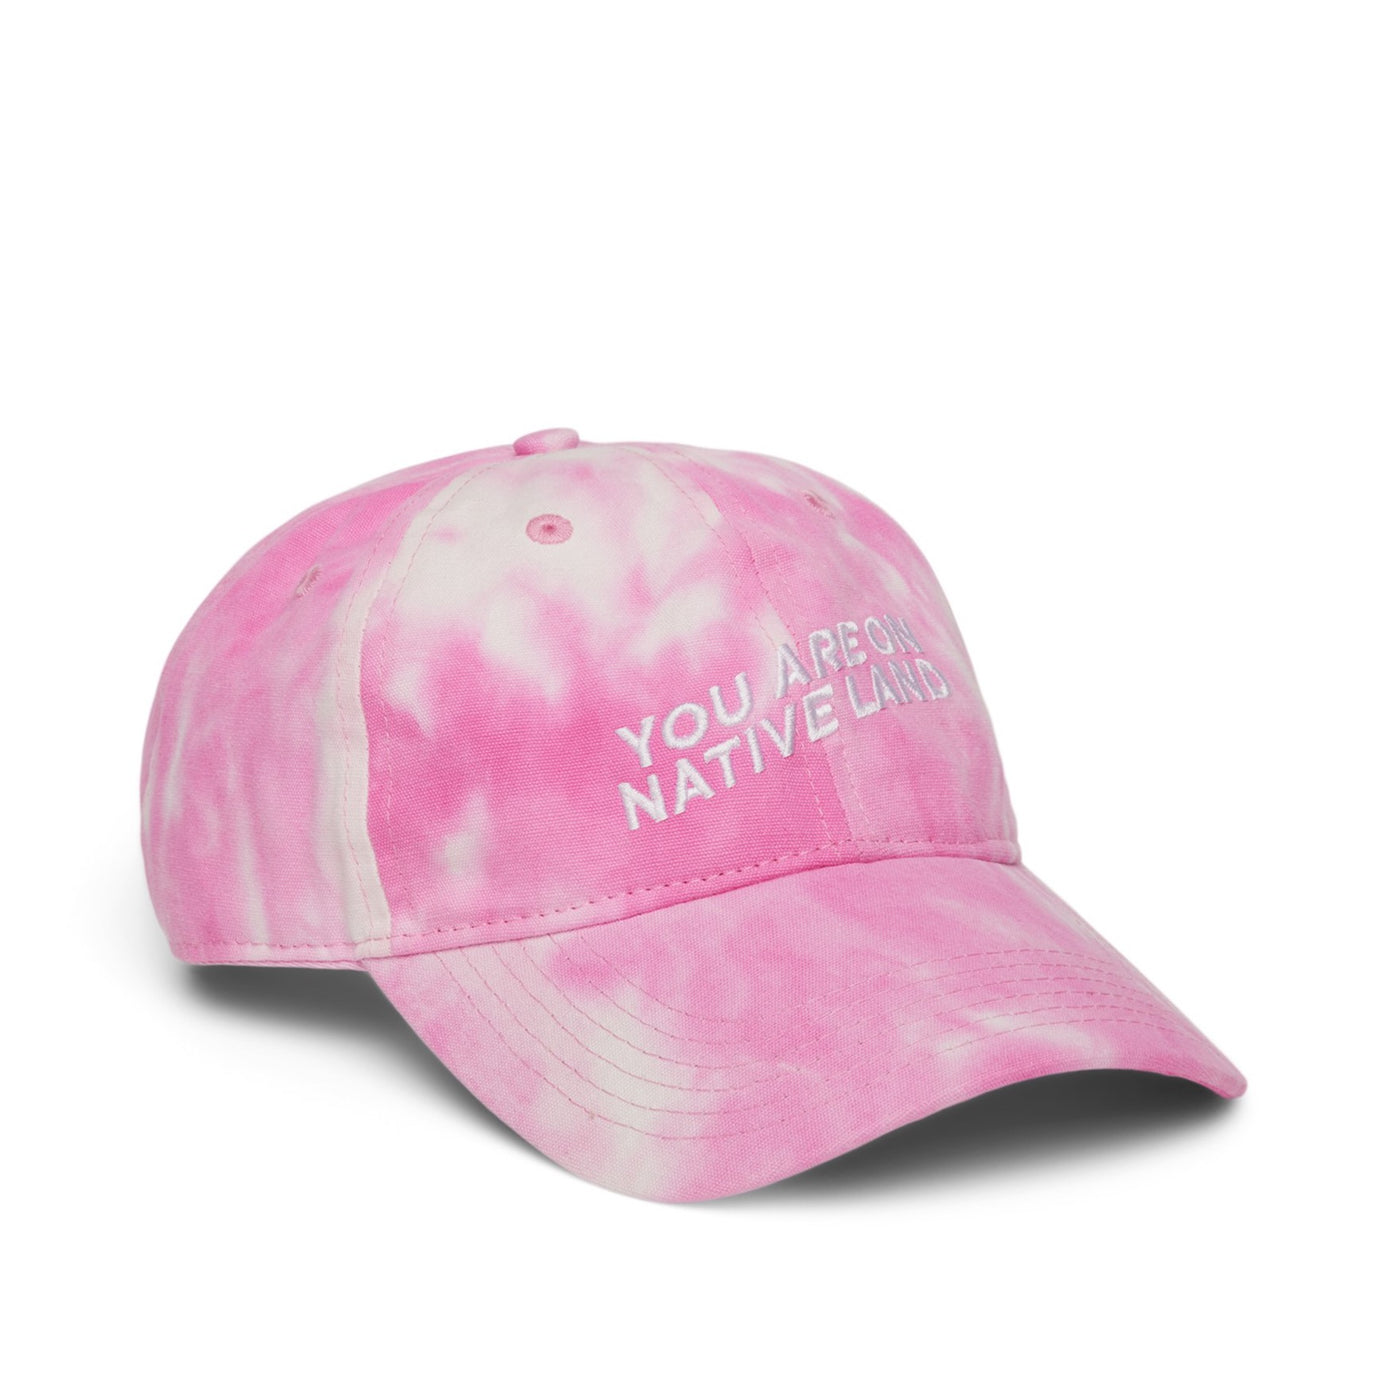 'YOU ARE ON NATIVE LAND' DAD CAP - PINK TIE DYE